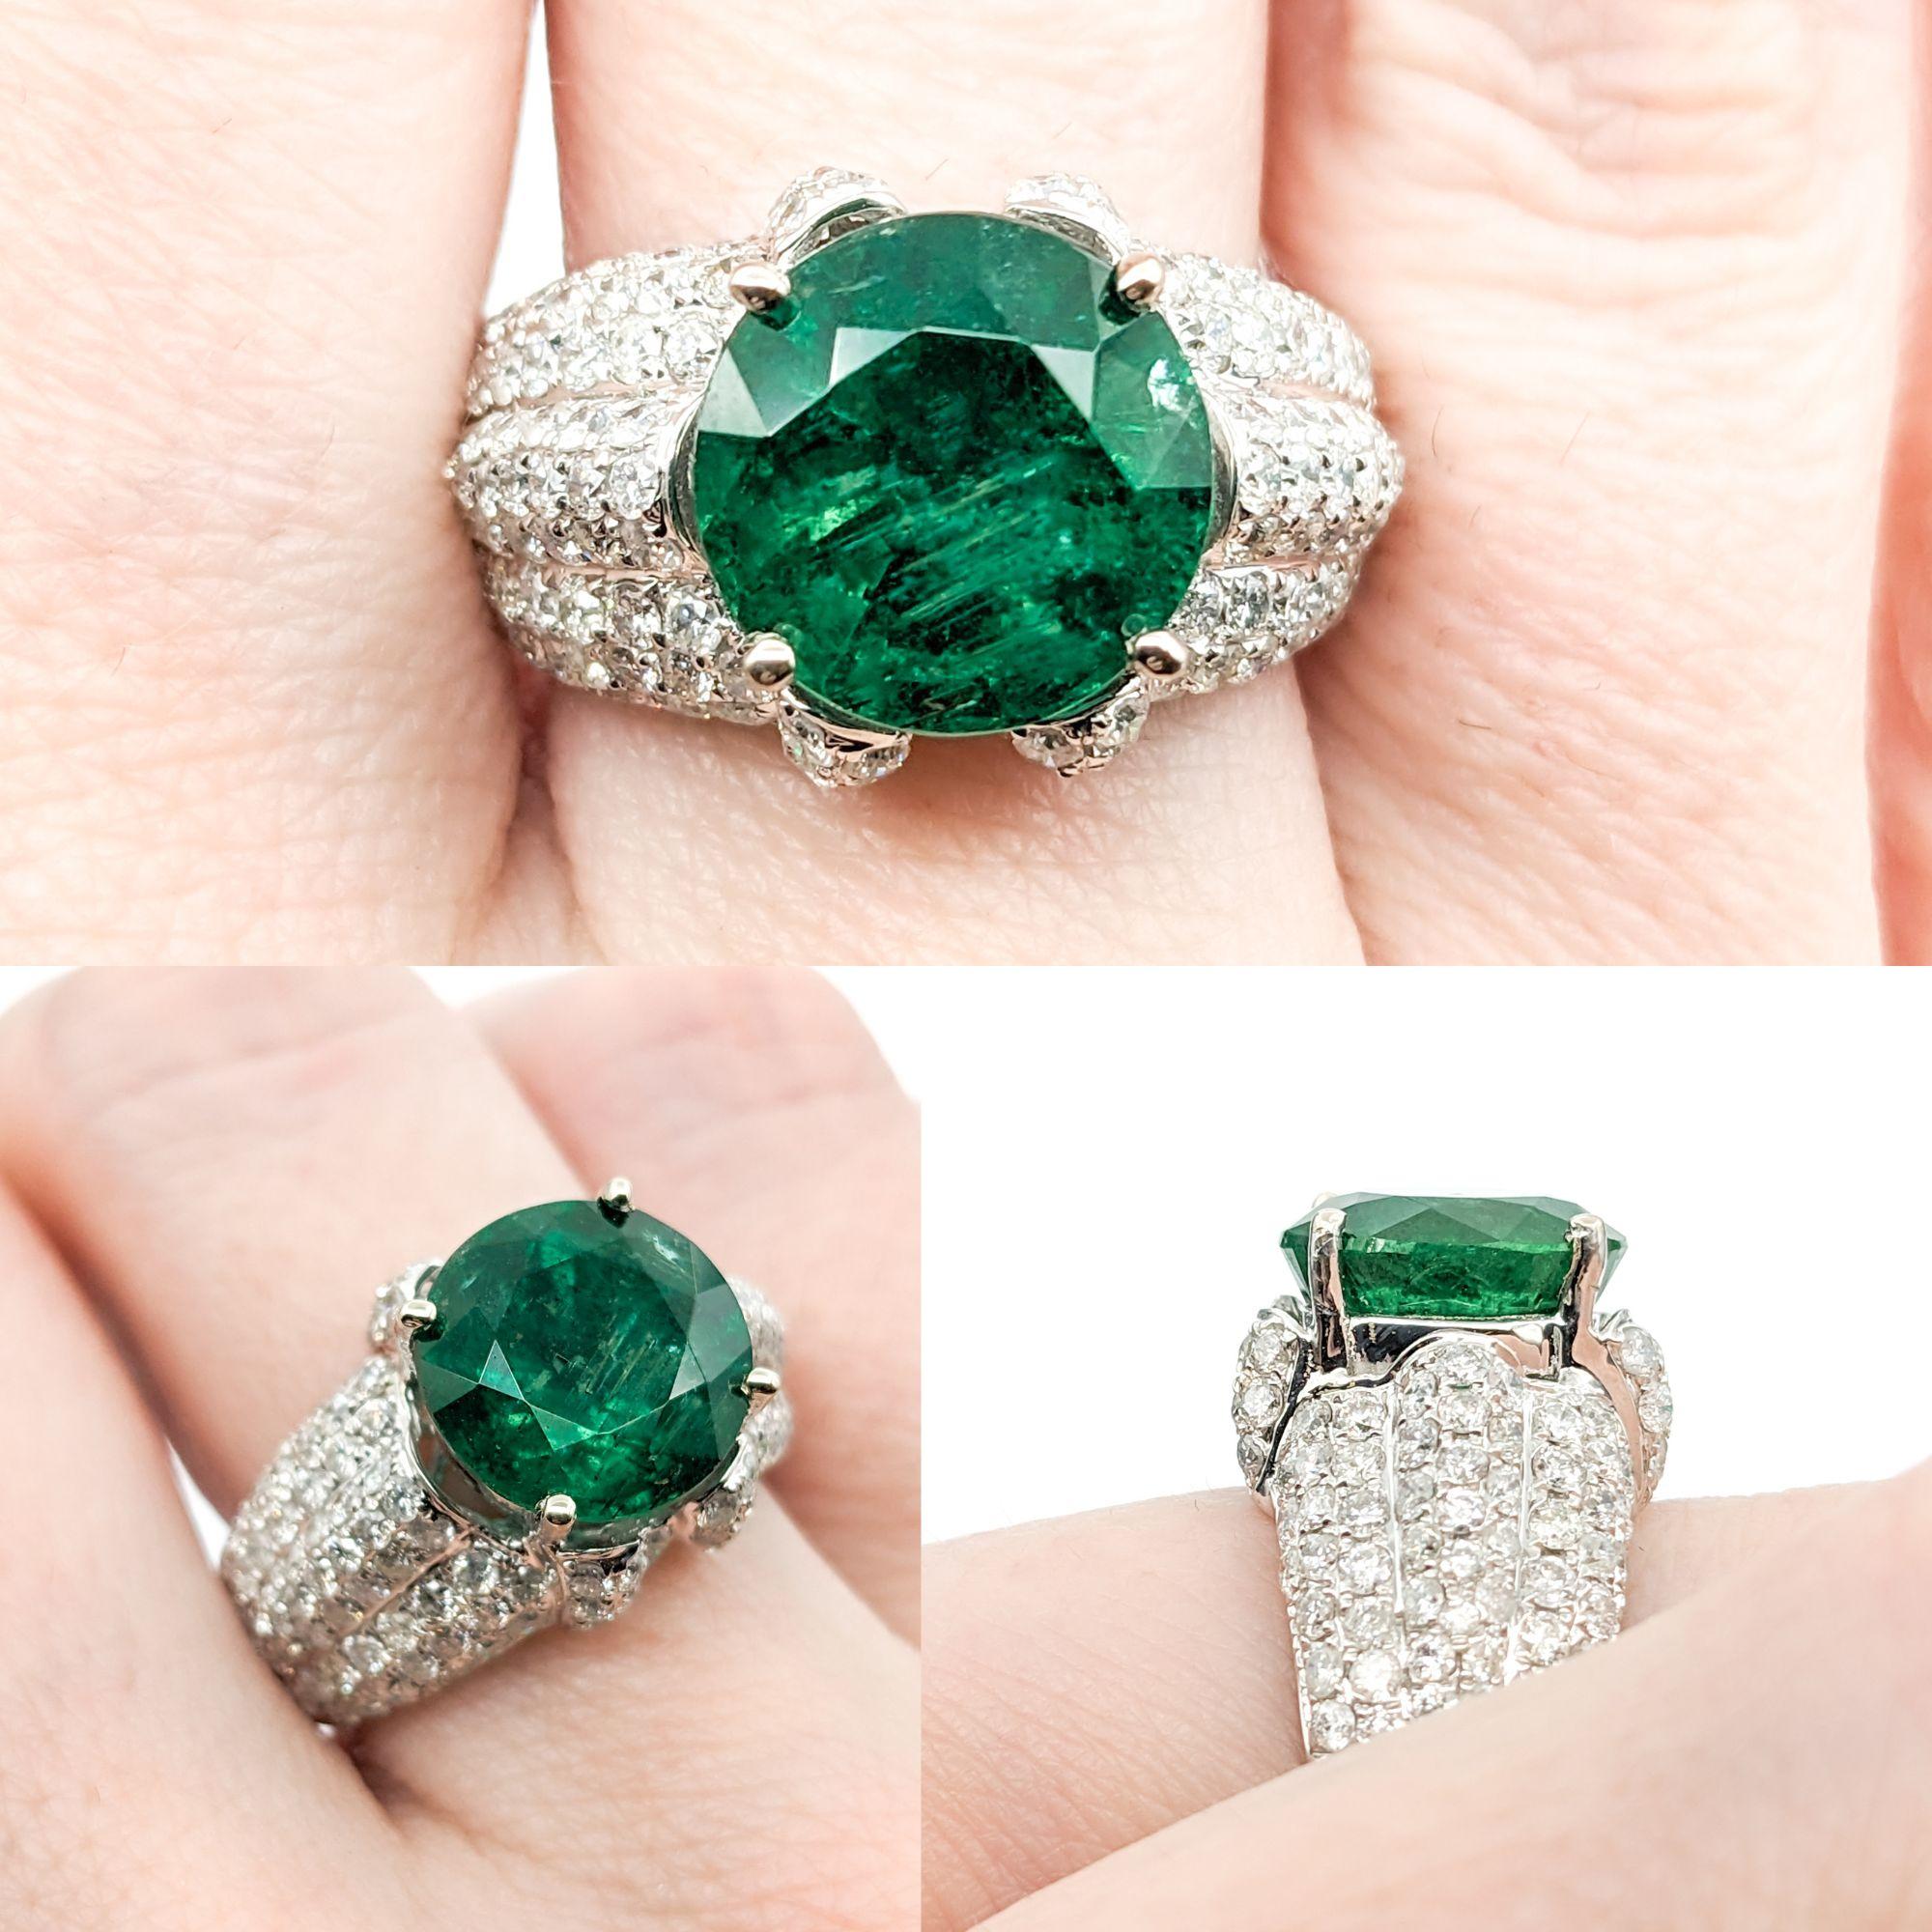 4.92ct Emerald & Diamond Ring In White Gold

Introducing this exquisite 4.92ct Emerald Statement Ring crafted in 14K White Gold, a stunning blend of luxury and elegance. The vibrant green hue and regal presence of the emerald make it the focal point